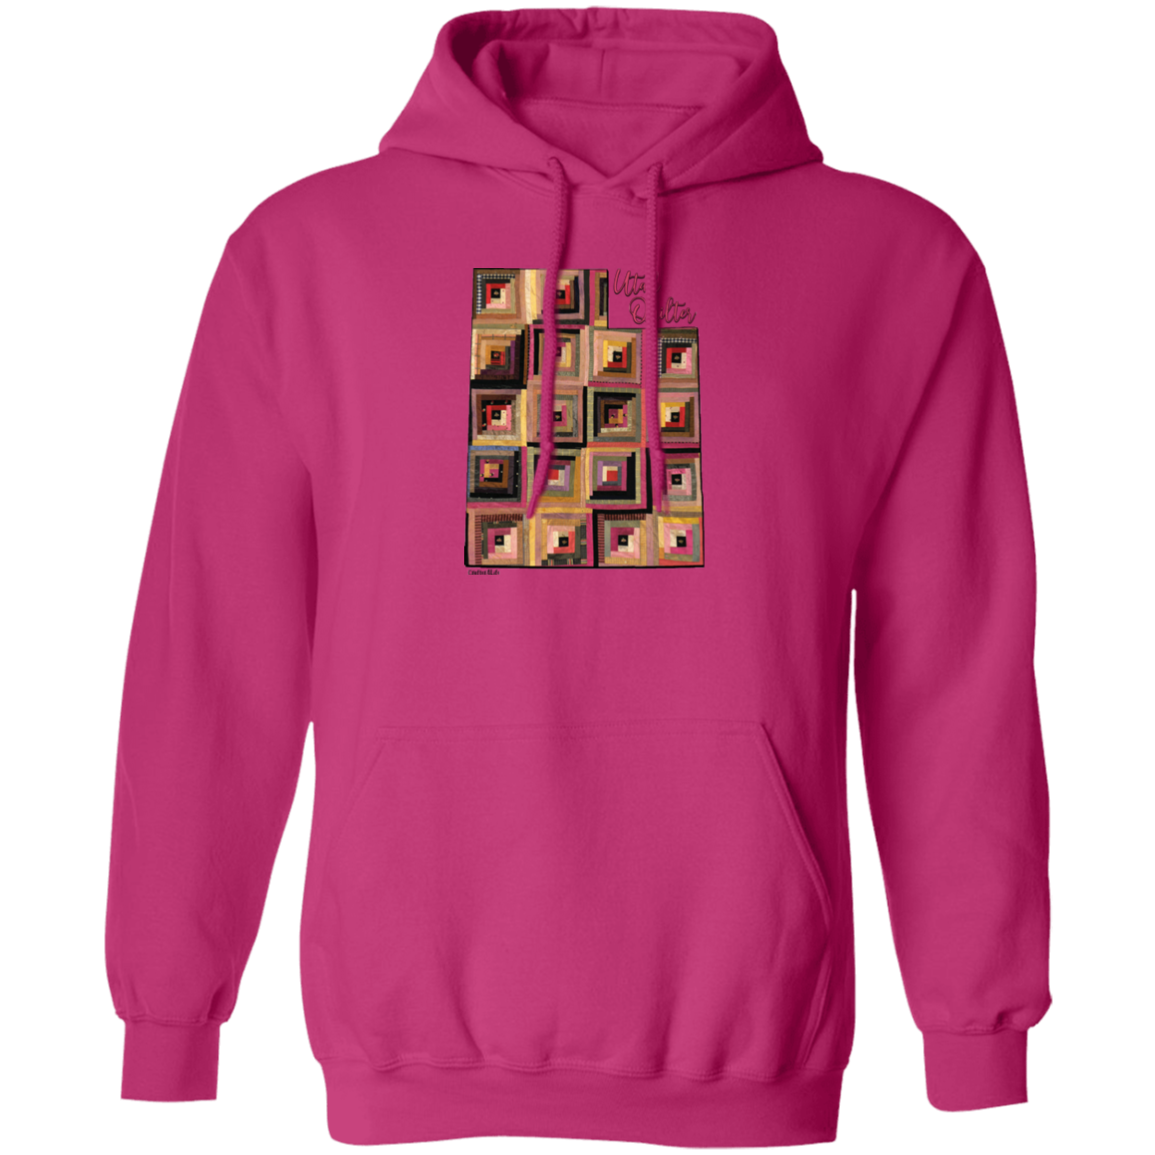 Utah Quilter Pullover Hoodie, Gift for Quilting Friends and Family